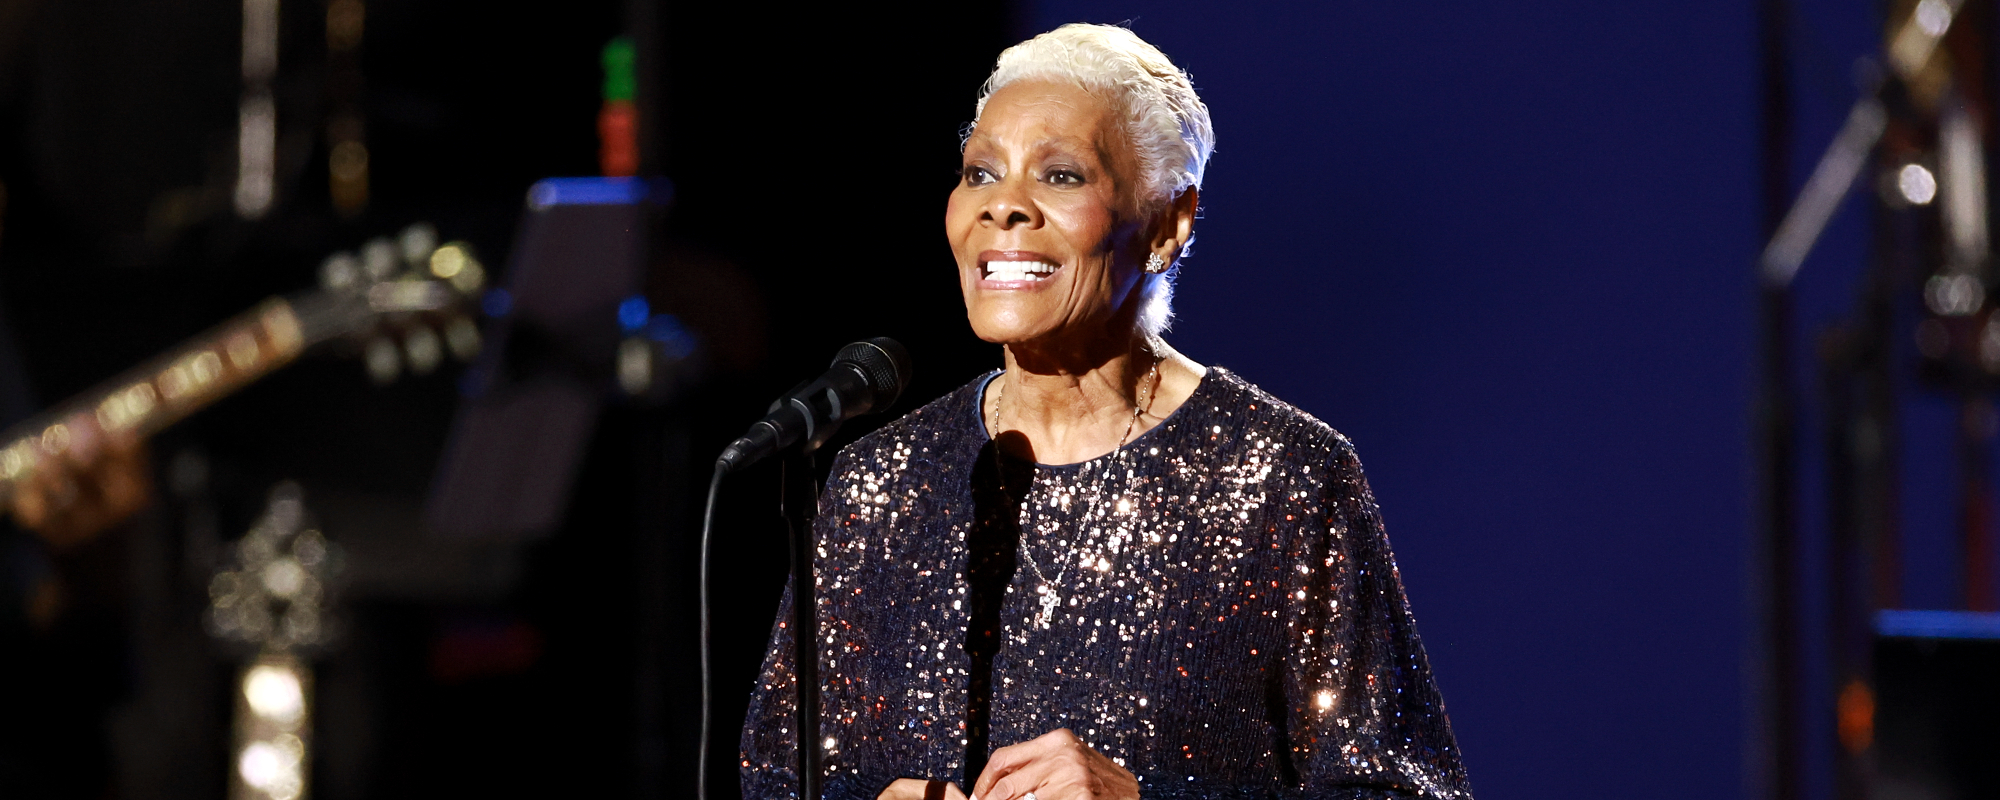 “Doja Who?”: Dionne Warwick Had No Clue Doja Cat Sampled Her in “Paint the Town Red”